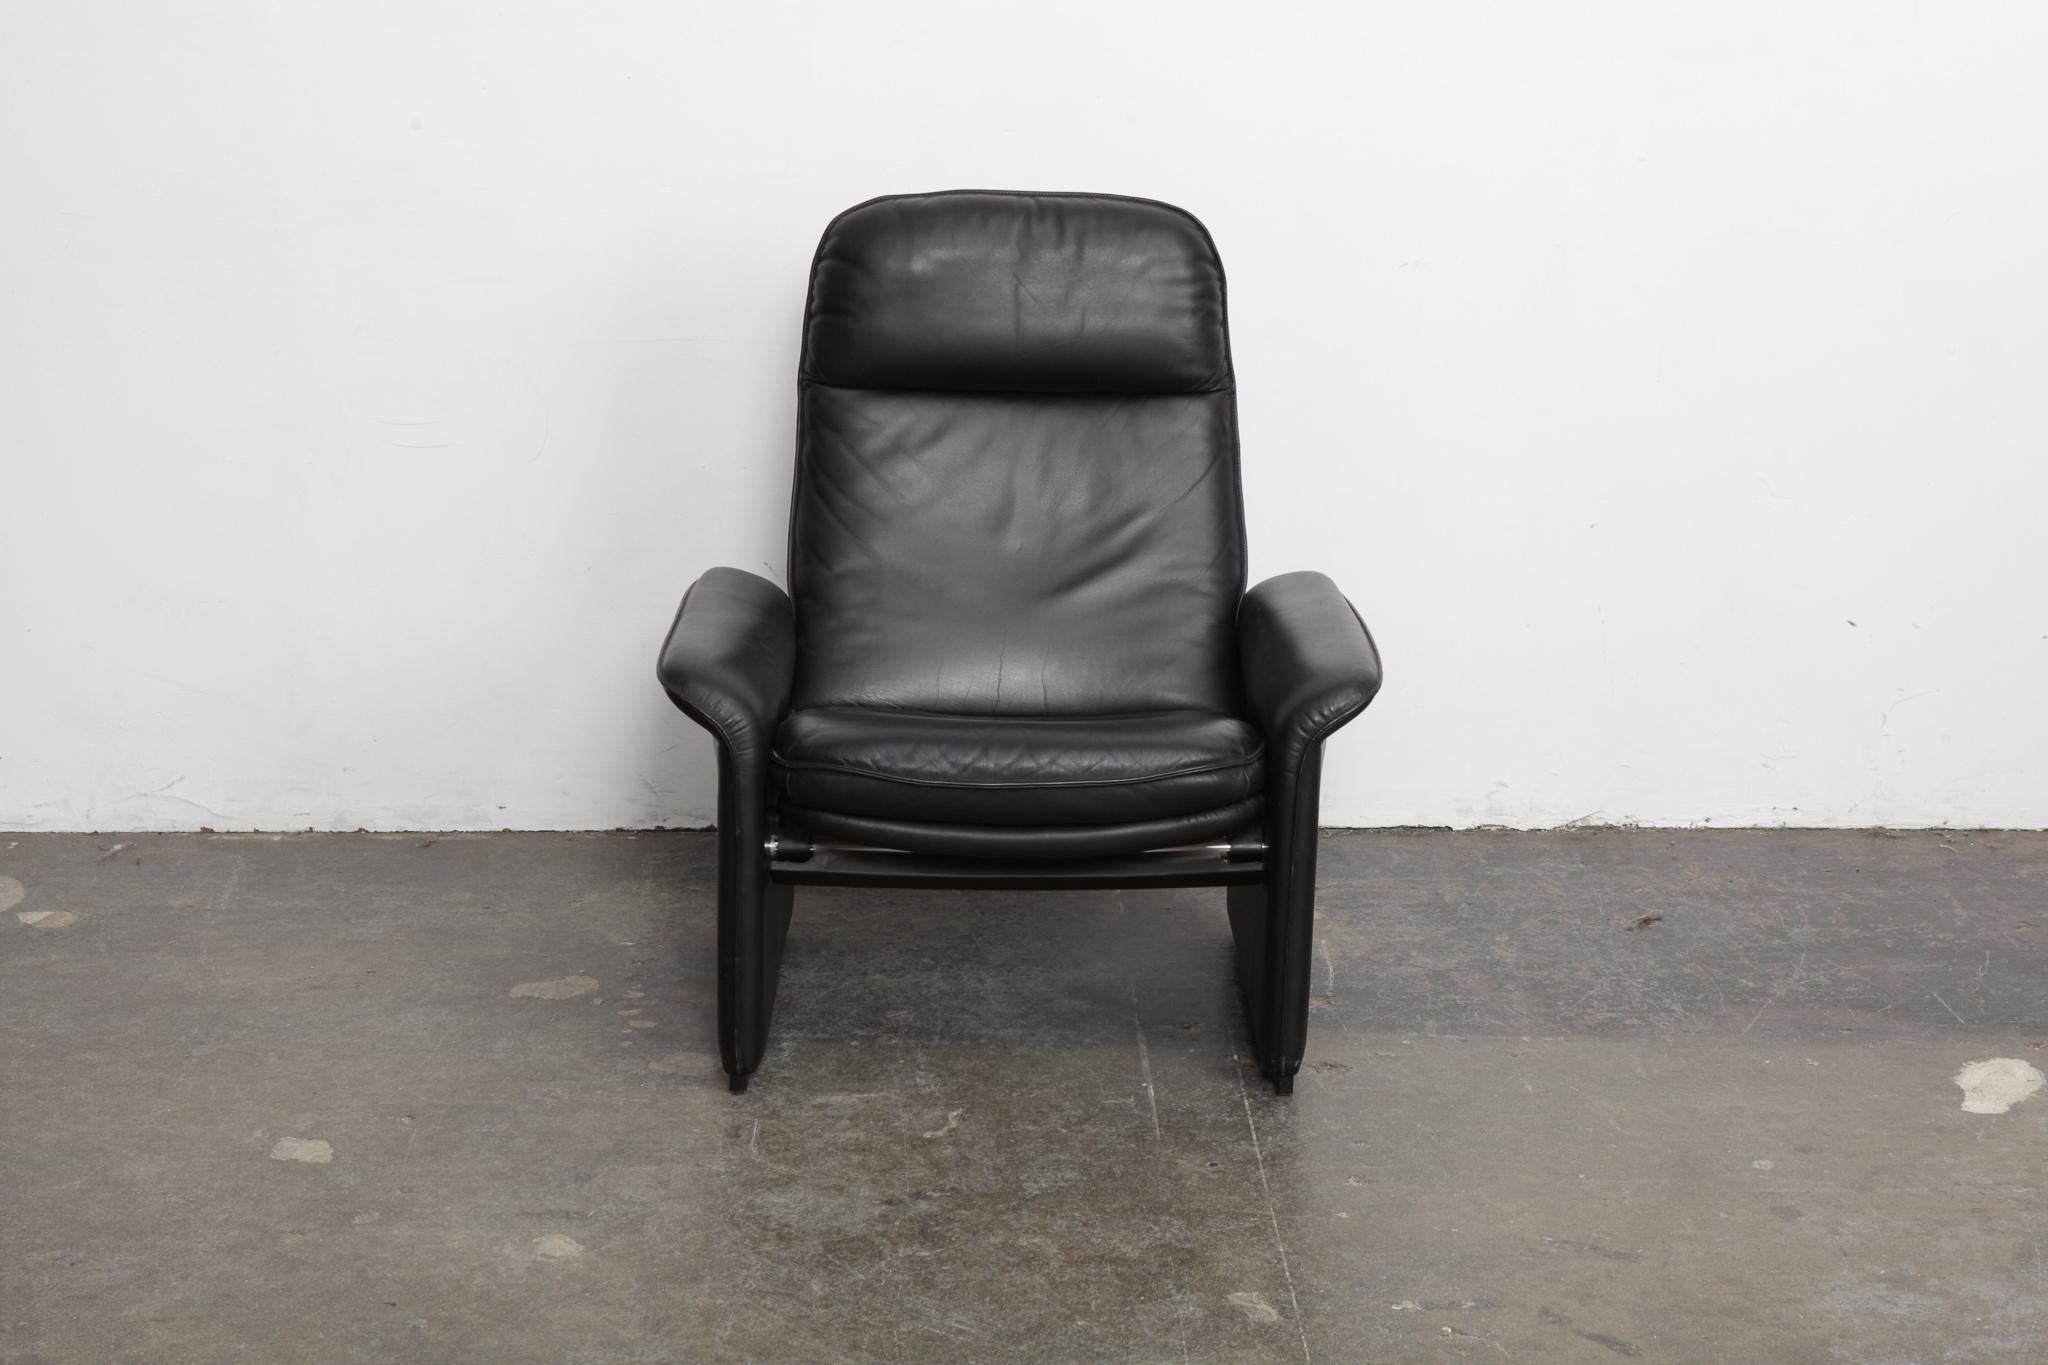 Original black leather recliner chair from De Sede, model DS50, Switzerland, 1970s. Leather is in excellent vintage condition.